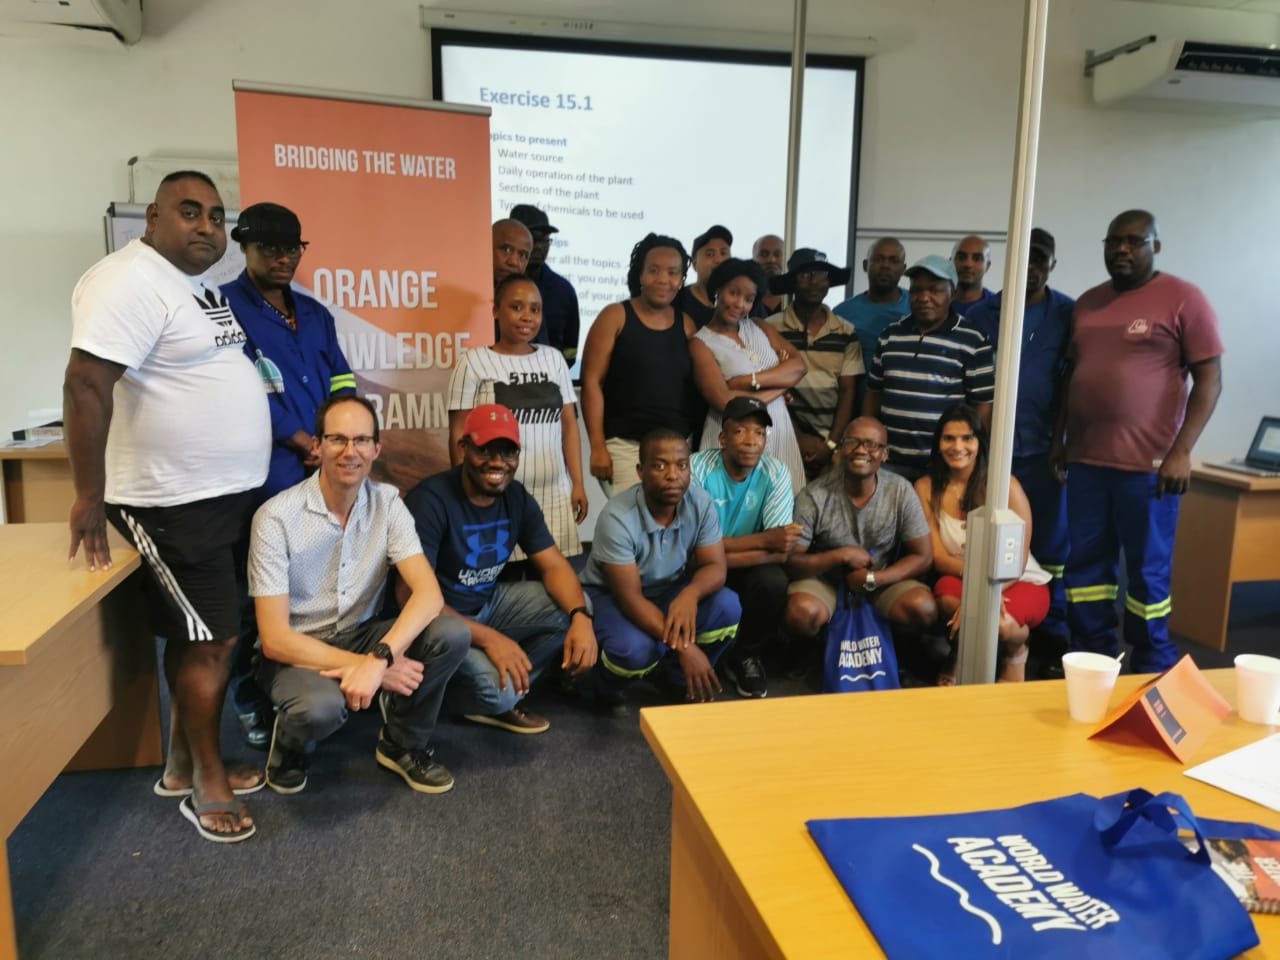 Enthusiastic participants in Durban, with trainers Prathna Gopi (sitting right) and Ron Jong (sitting left)